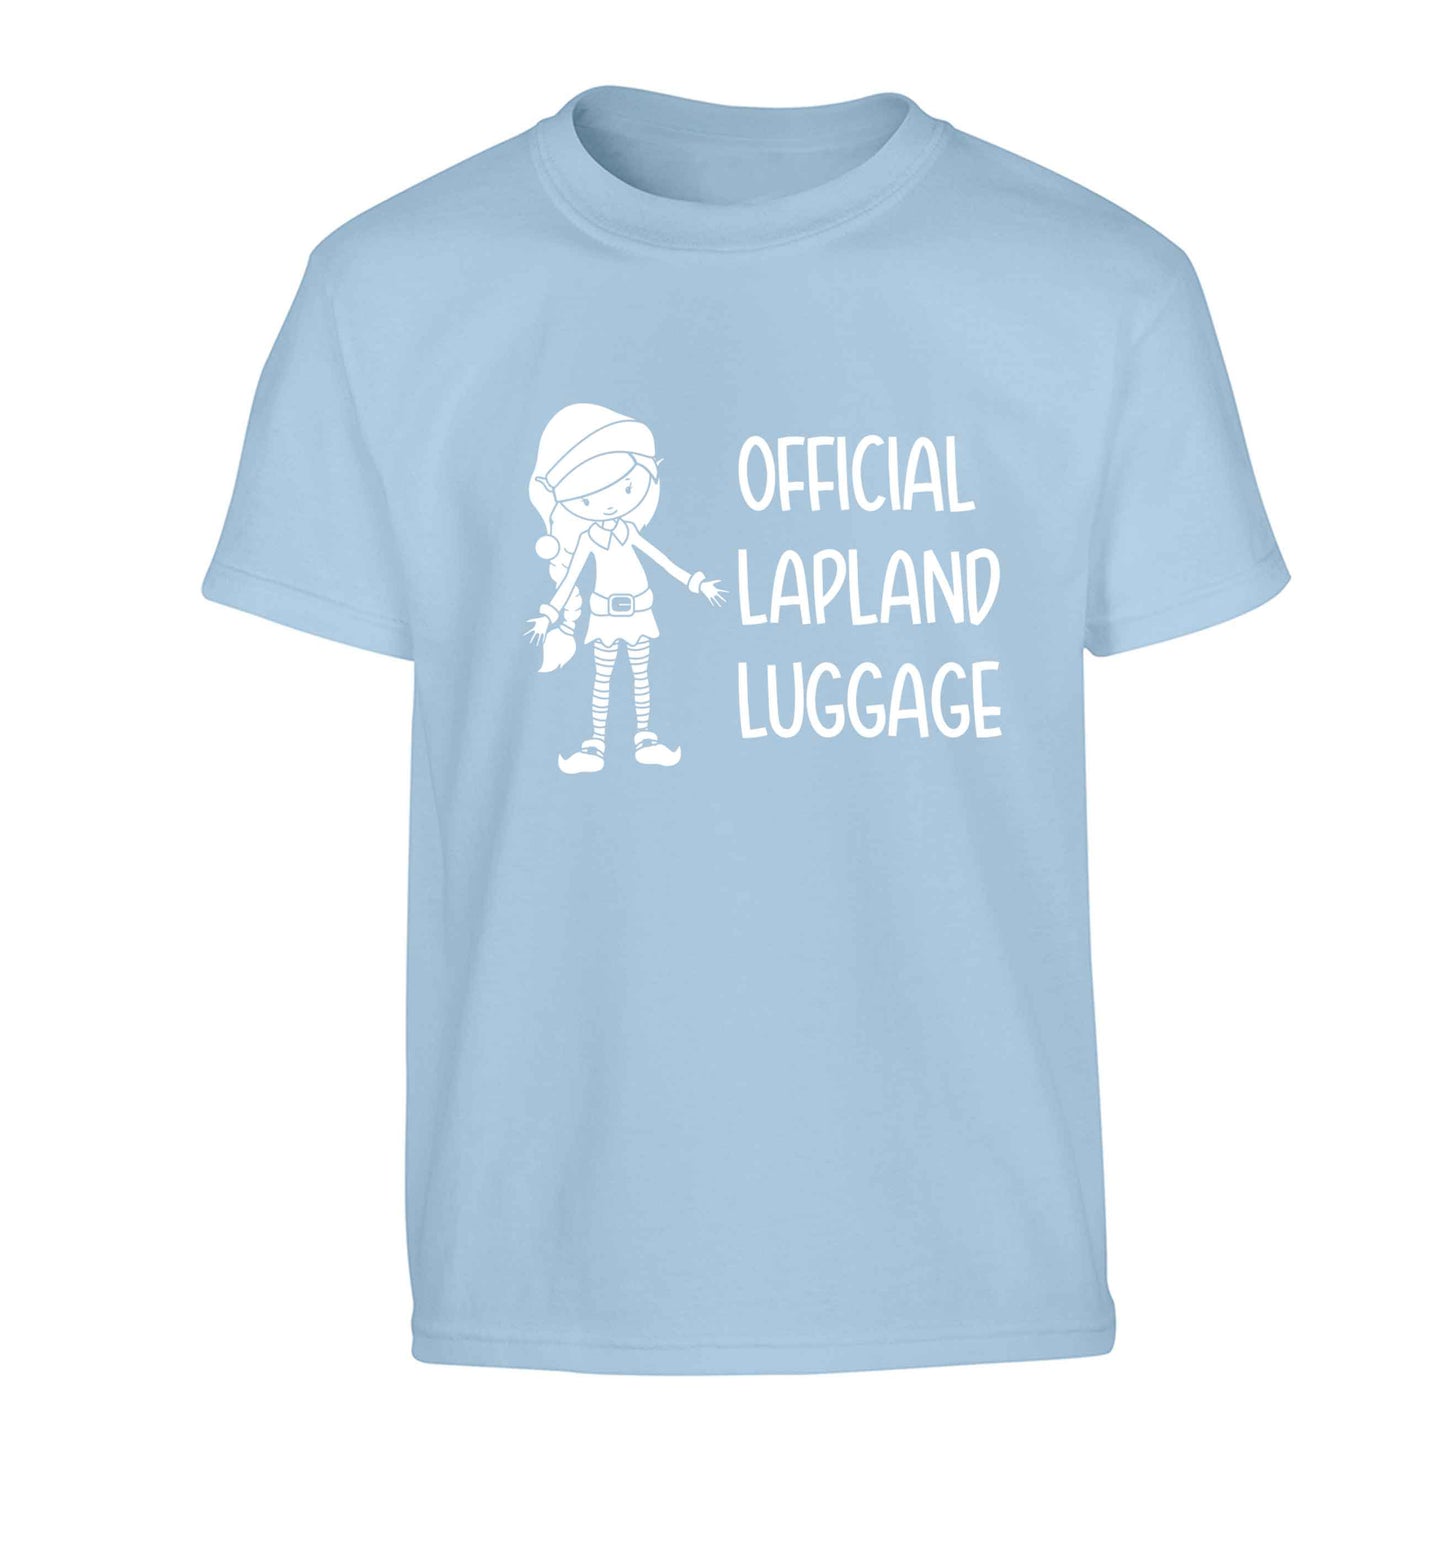 Official lapland luggage - Elf snowflake Children's light blue Tshirt 12-13 Years